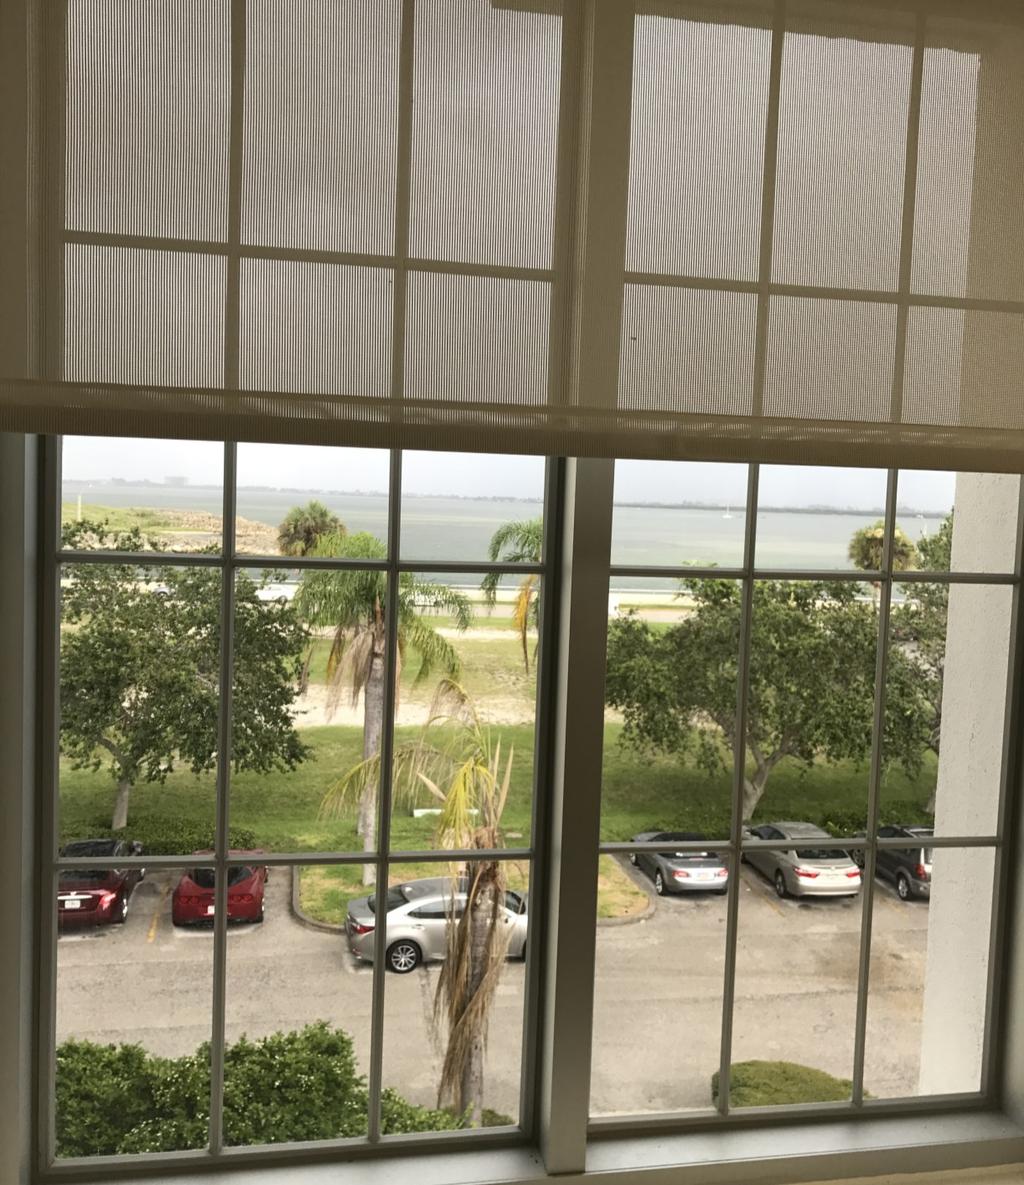 PROPERTY INFORMATION ADDRESS: 200 So. Indian River Drive, Fort Pierce, Florida 34950 LOCATION: Located in the heart of downtown Fort Pierce this suite offers an impressive location.